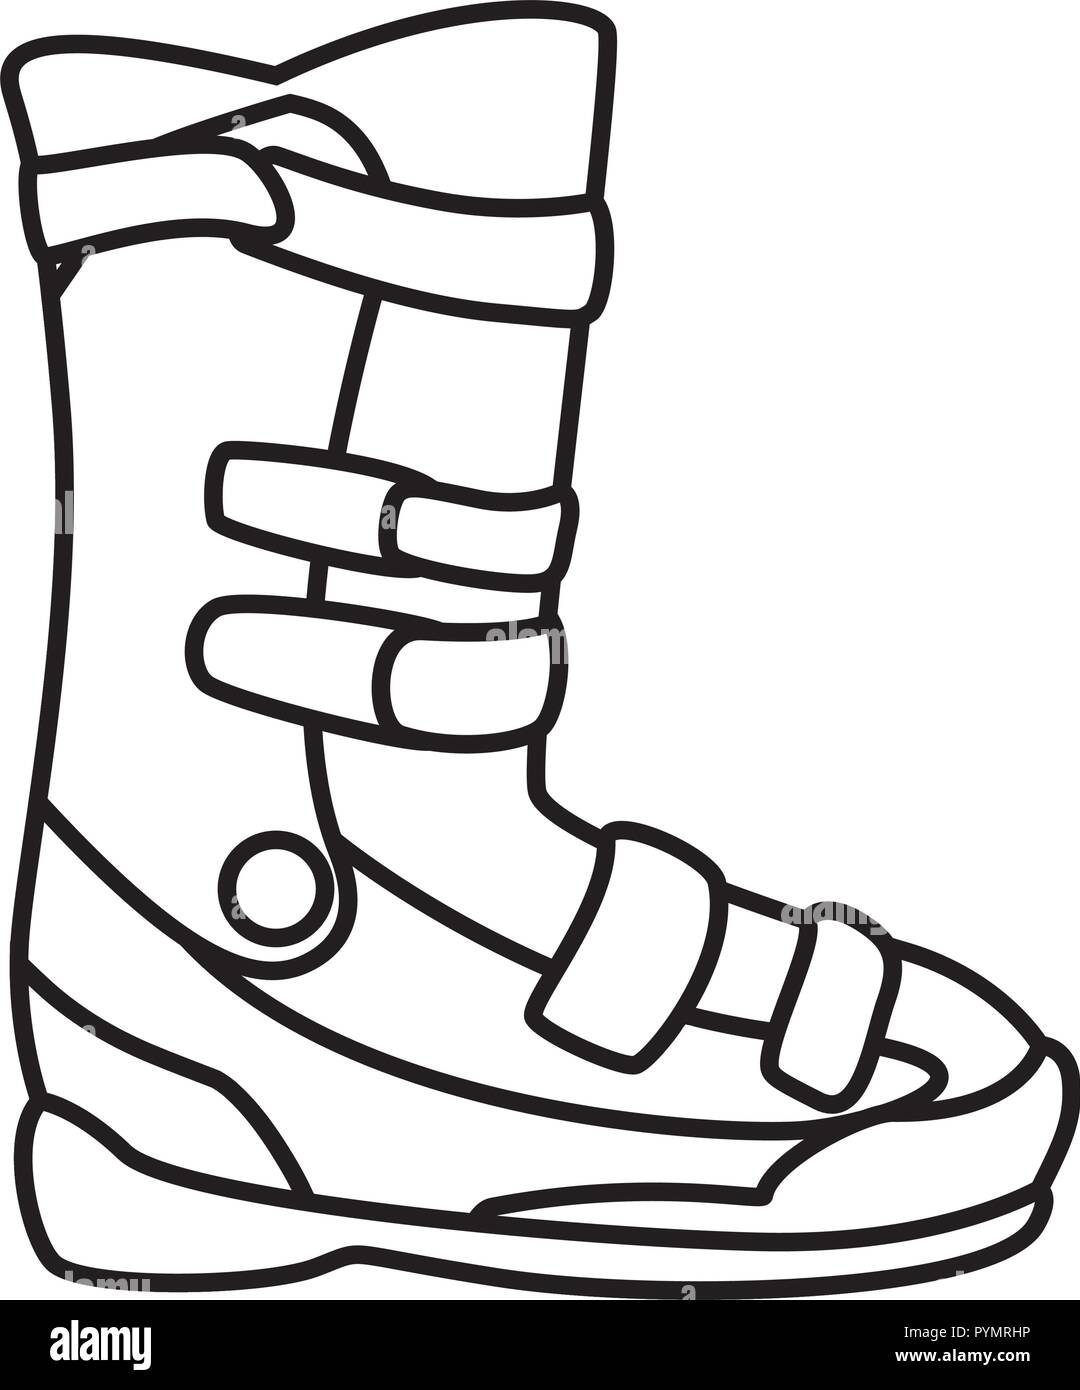 Snowboard shoes Stock Vector Images - Alamy